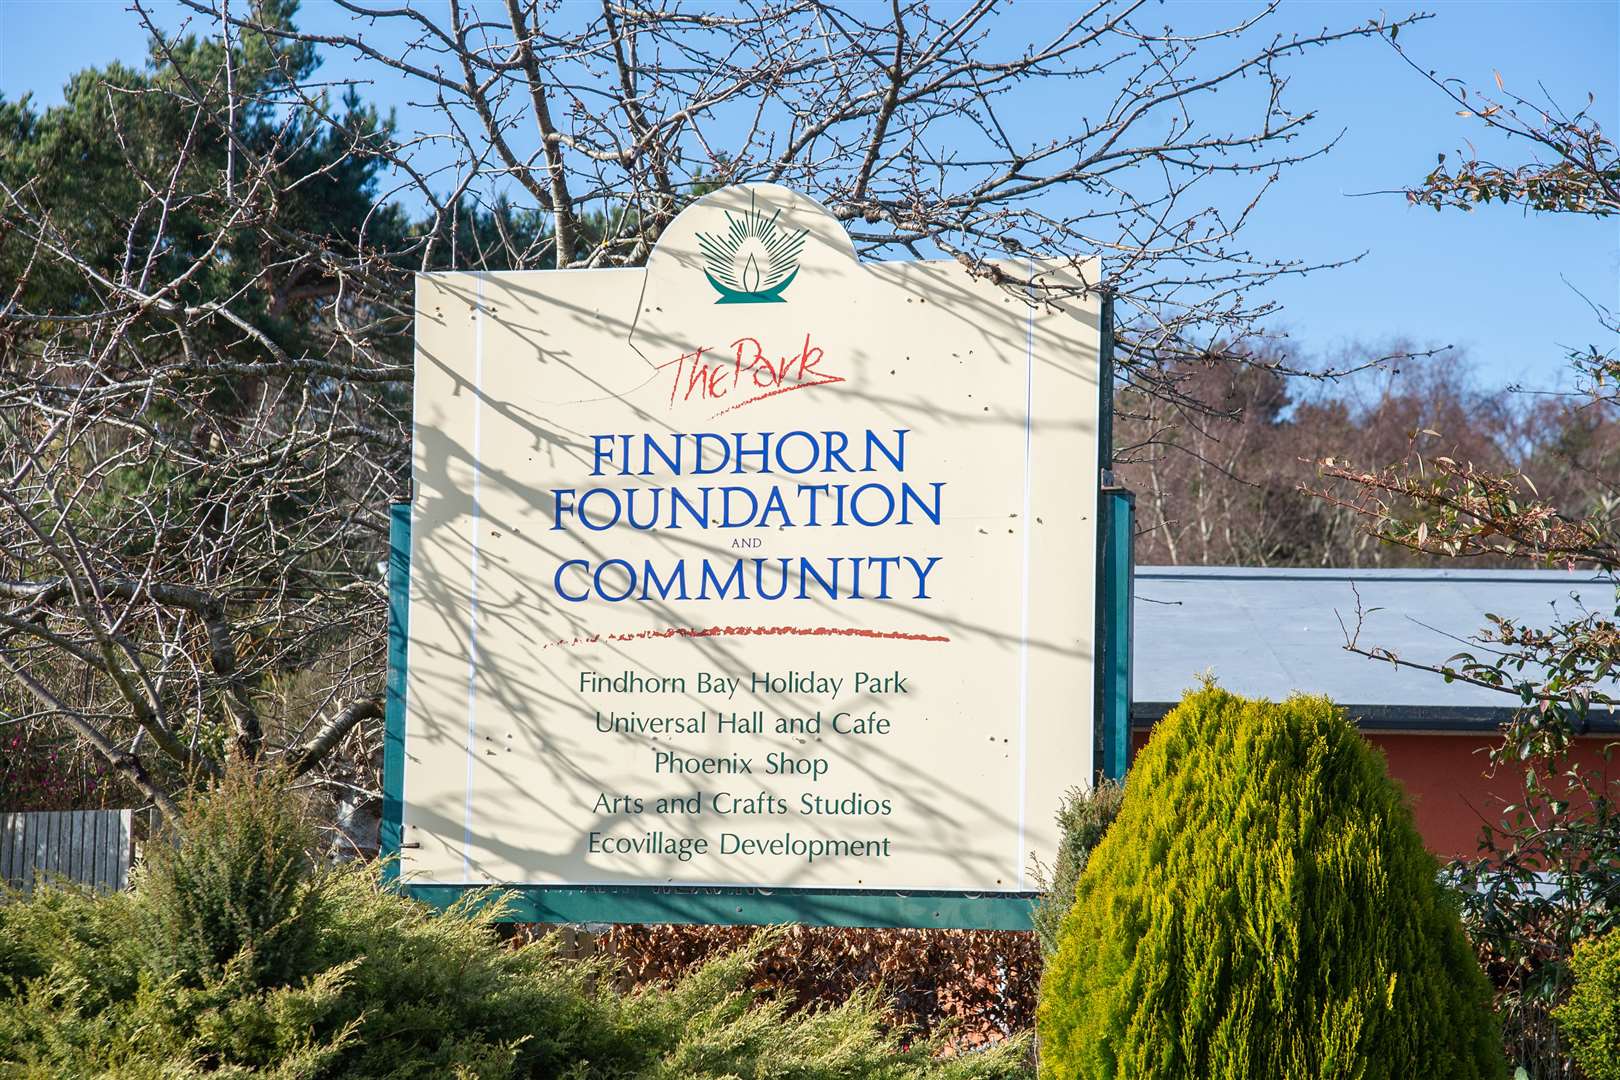 The entrance to the Findhorn Foundation and Community Park. .. Picture: Daniel Forsyth..